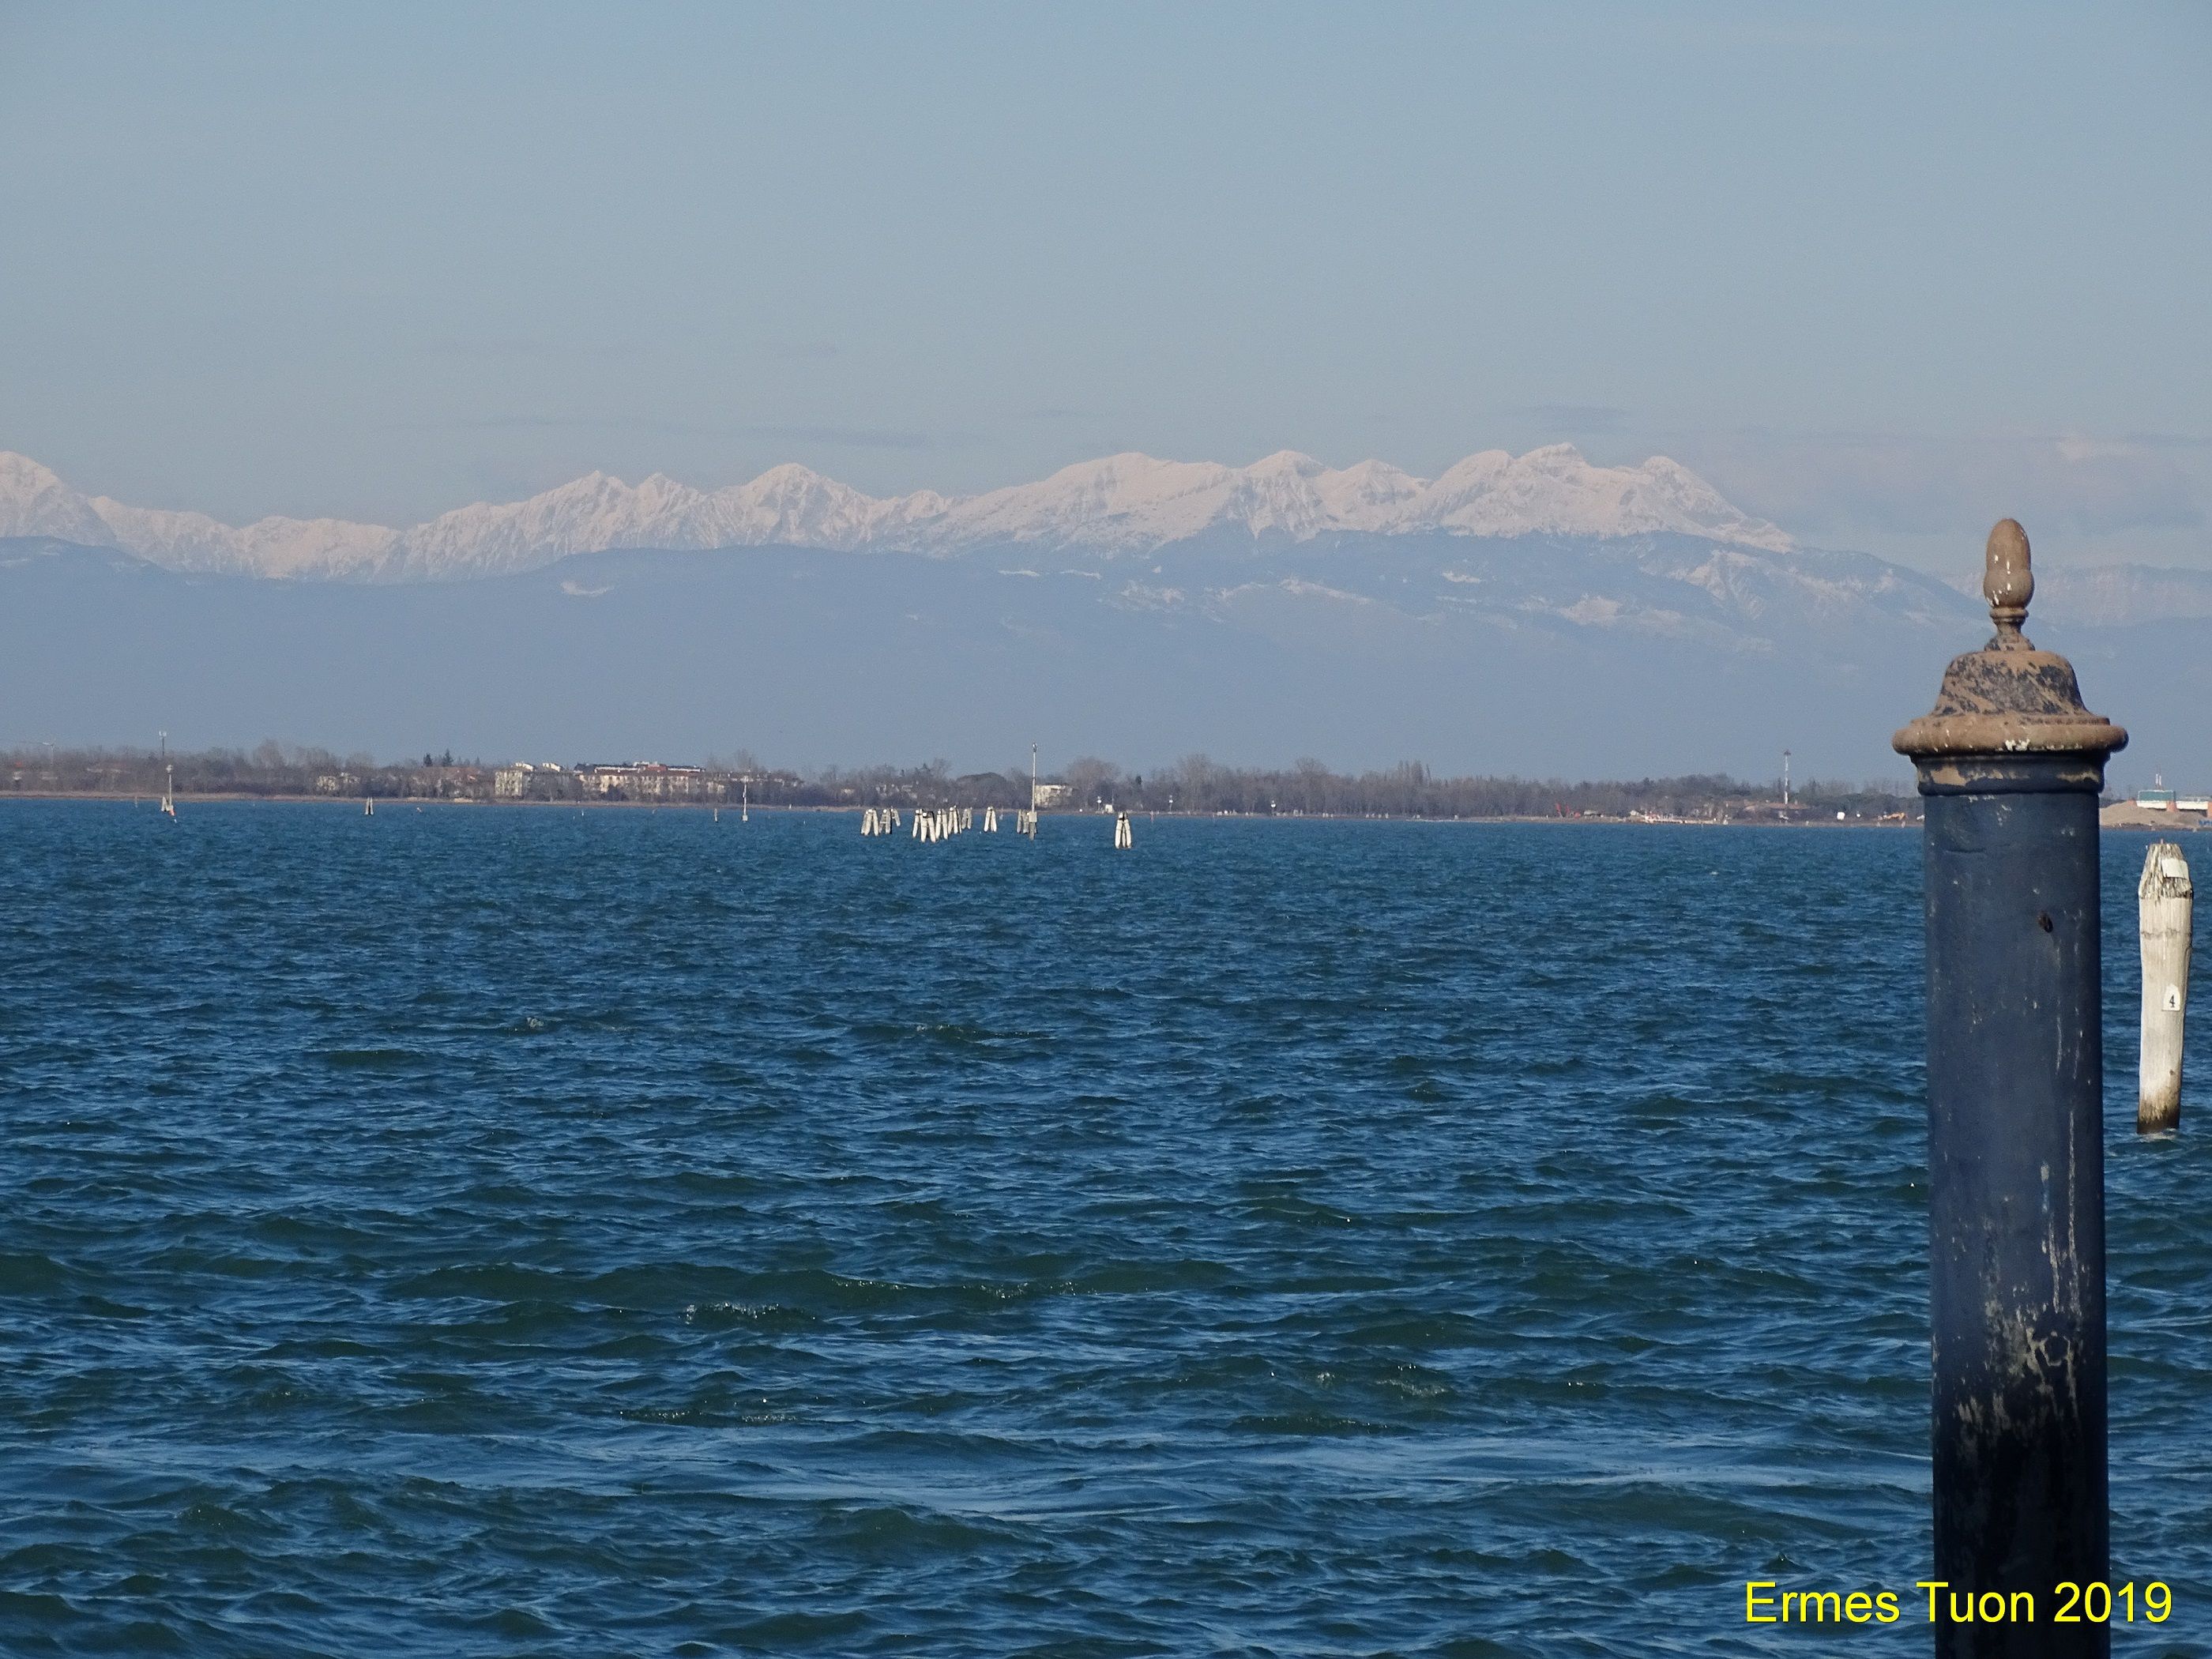 Caption: Dolomites view from the Venetian Lagoon - Local guide @ermest